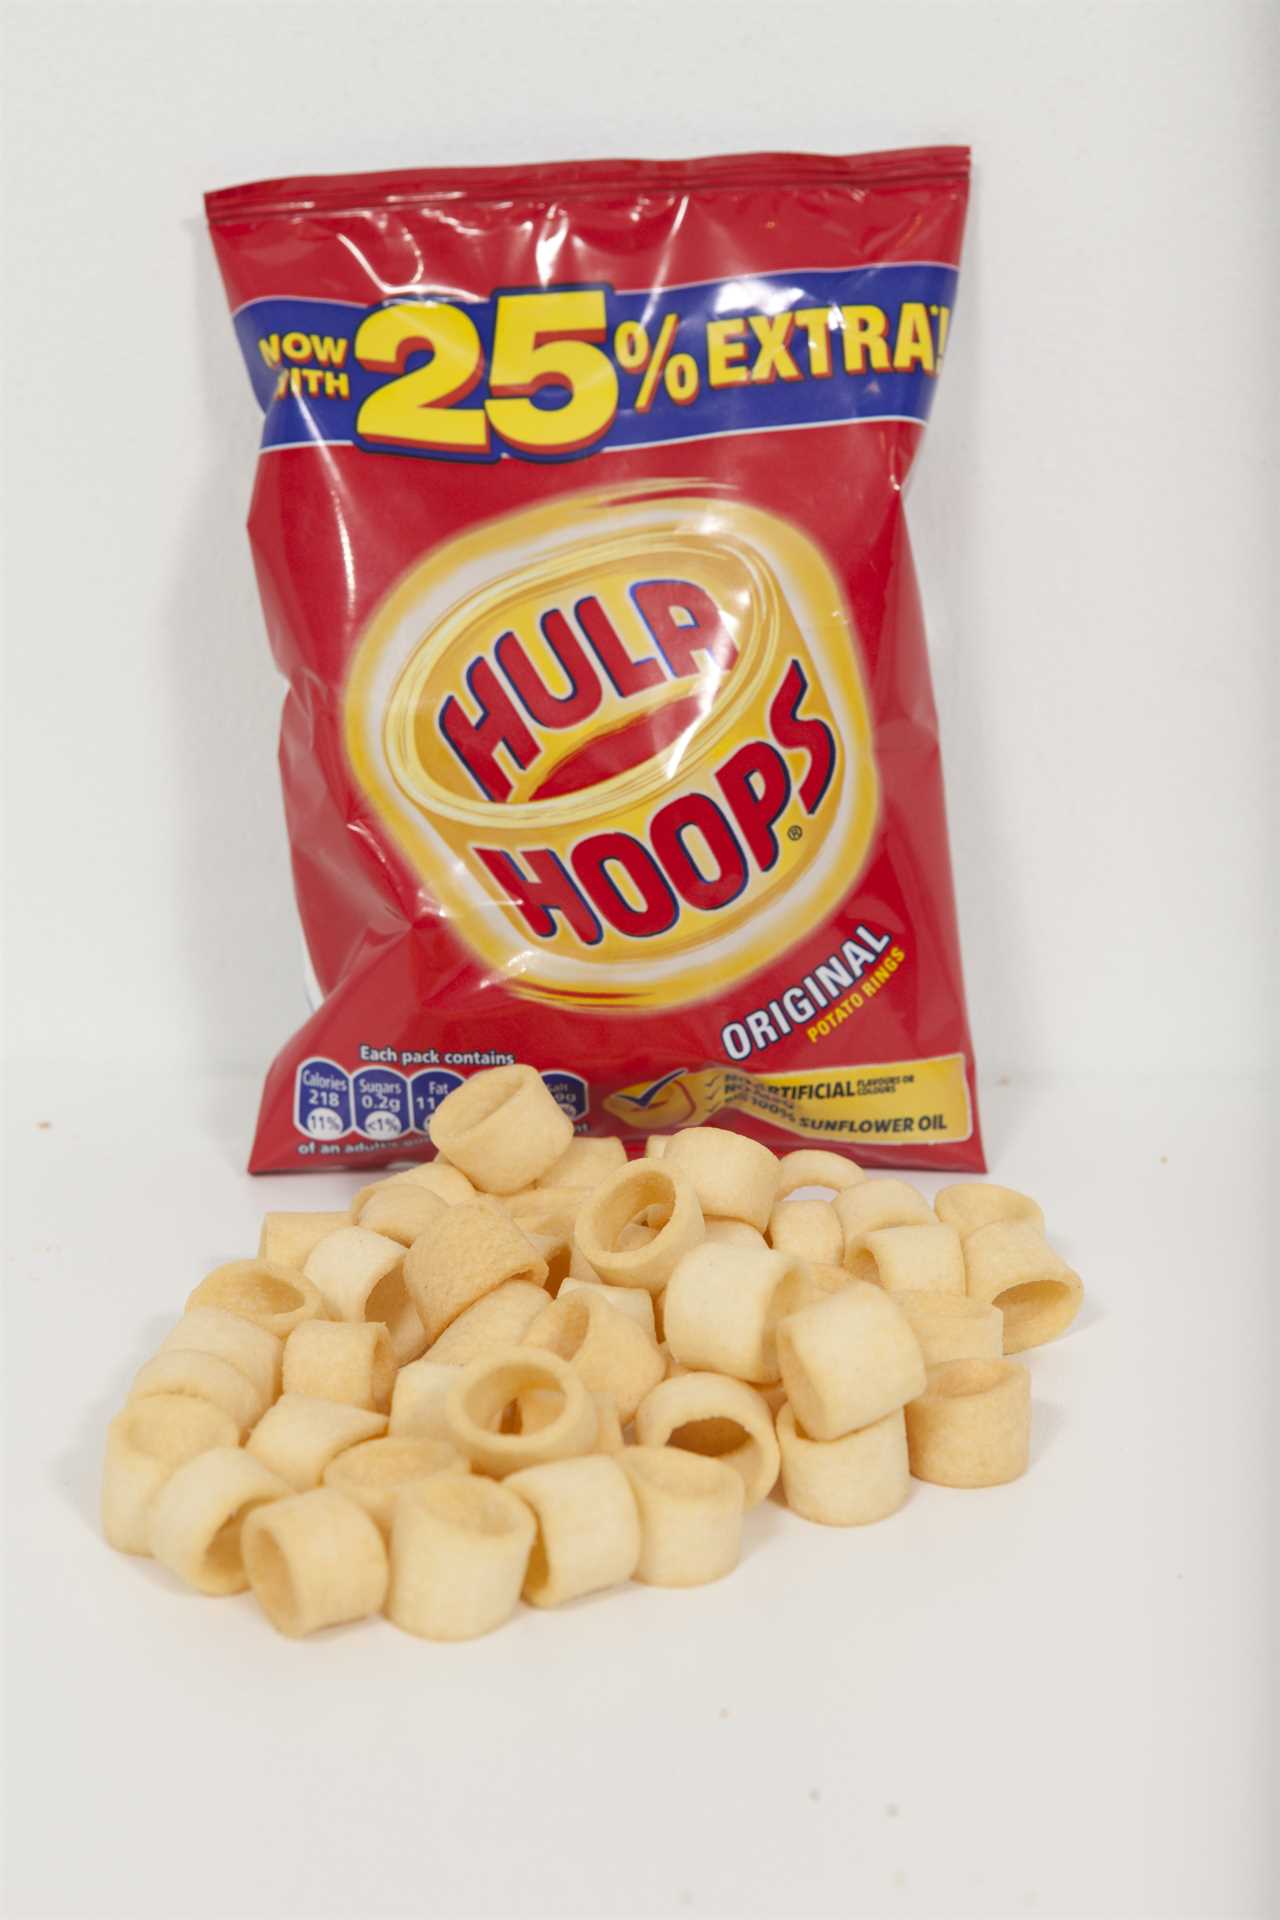 Long Covid sufferer ‘told eating Hula Hoops can ease debilitating heart condition’ as docs warn of tide of new cases